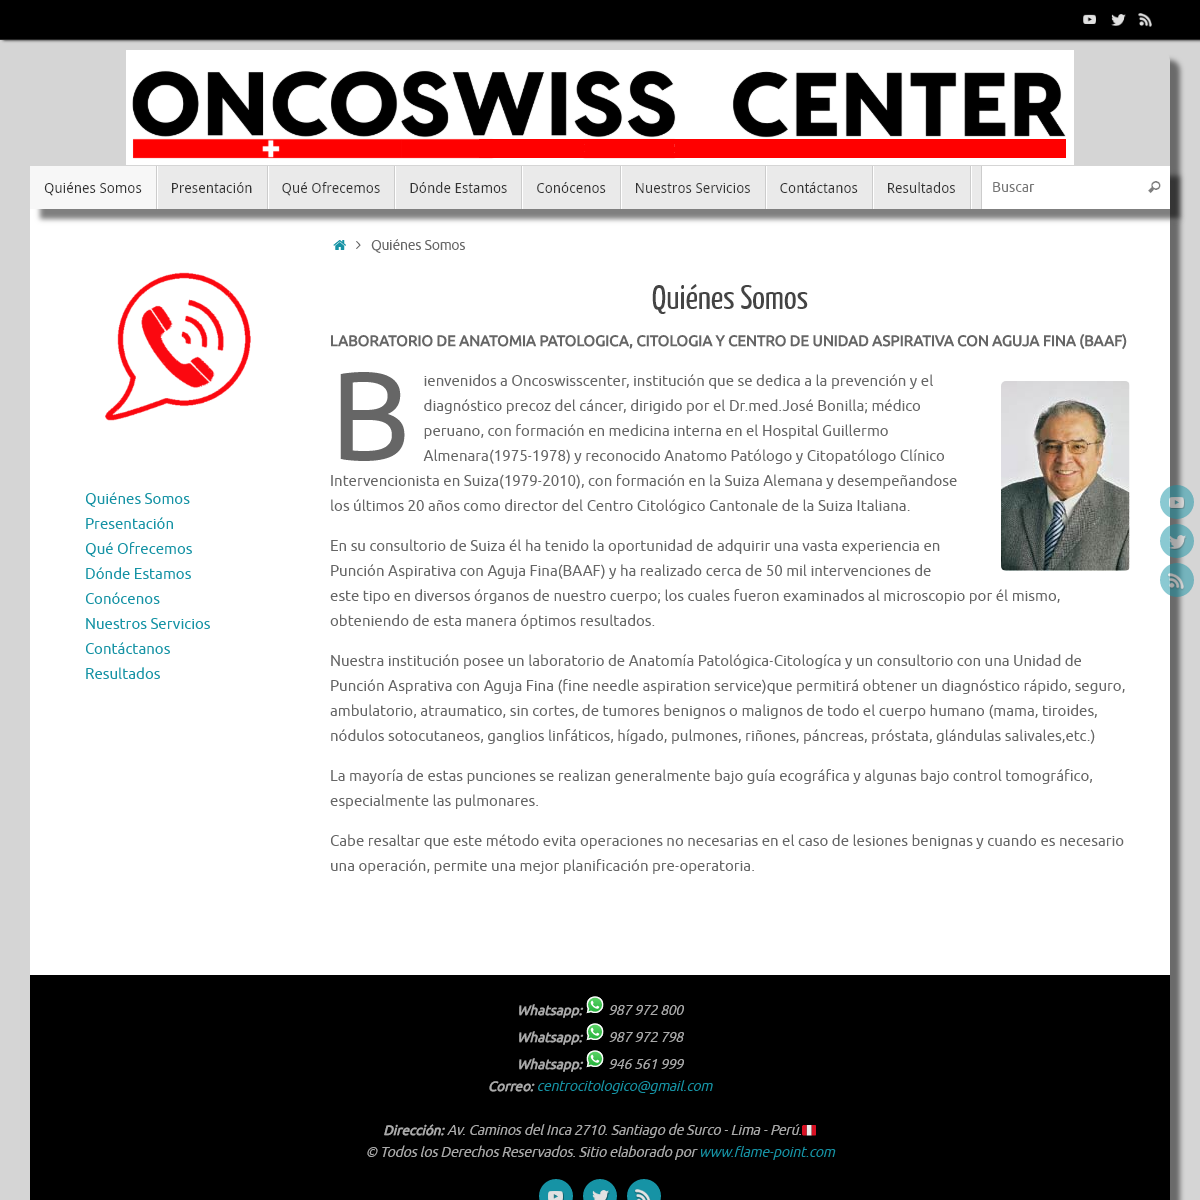 A complete backup of oncoswisscenter.com